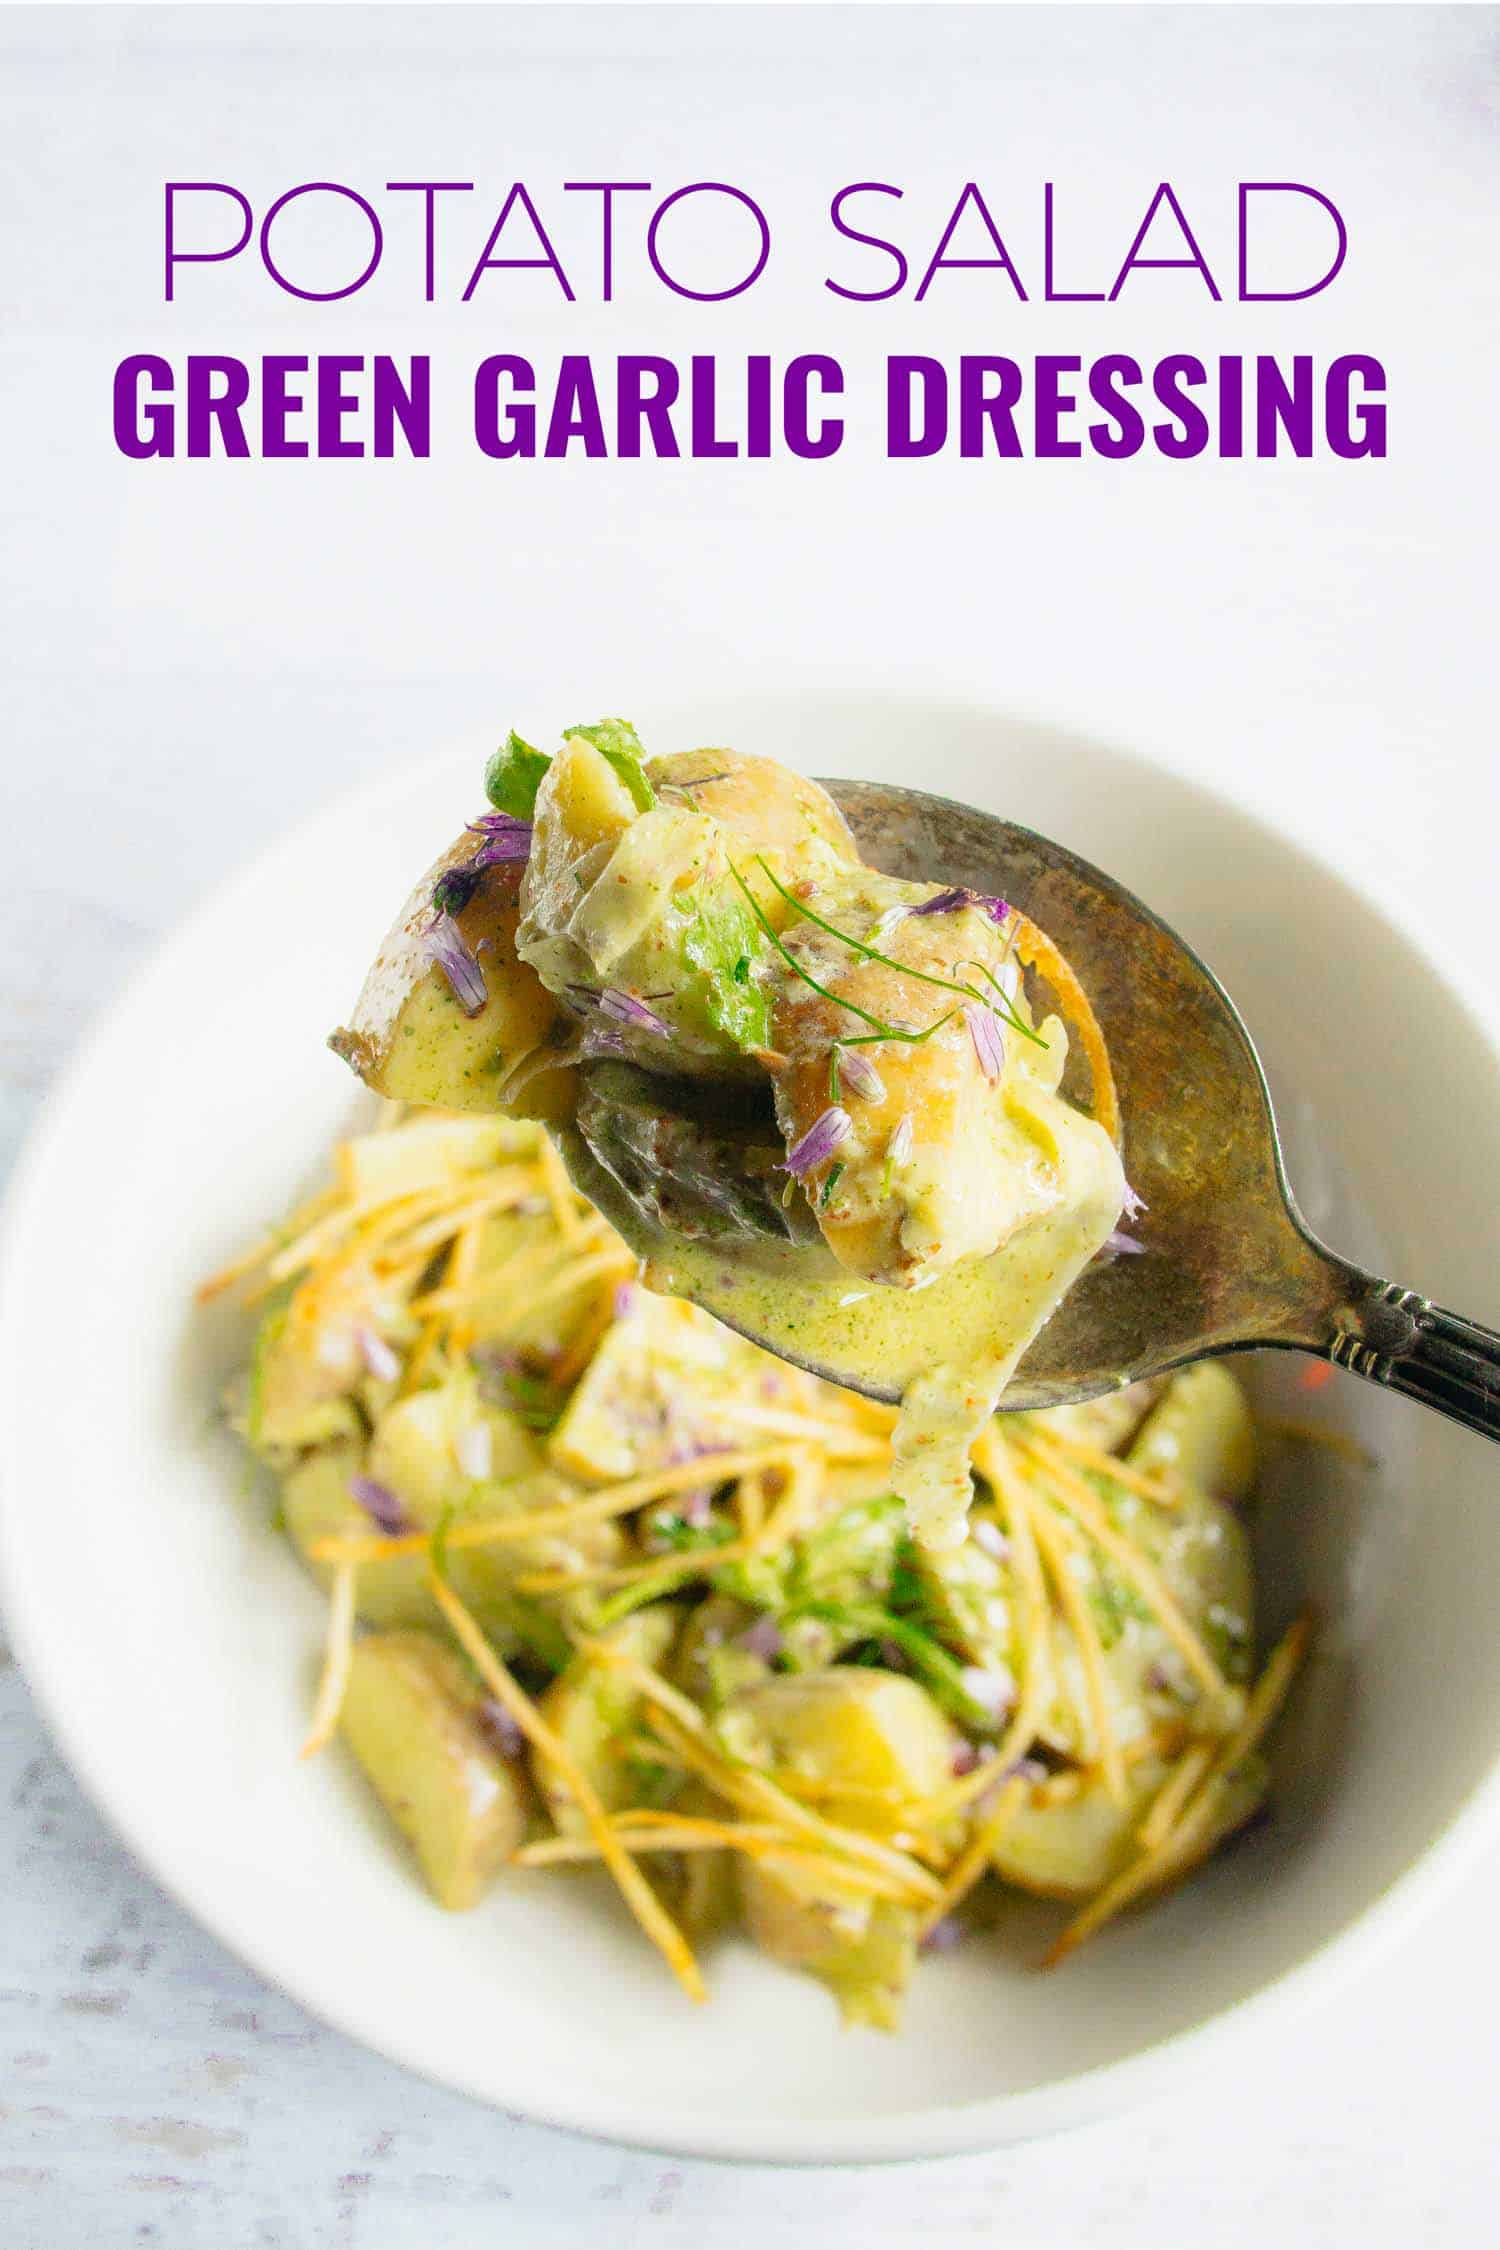 This green garlic potato salad dressing is so addictive and tastes even better the next day. Your friends will beg you for the recipe.